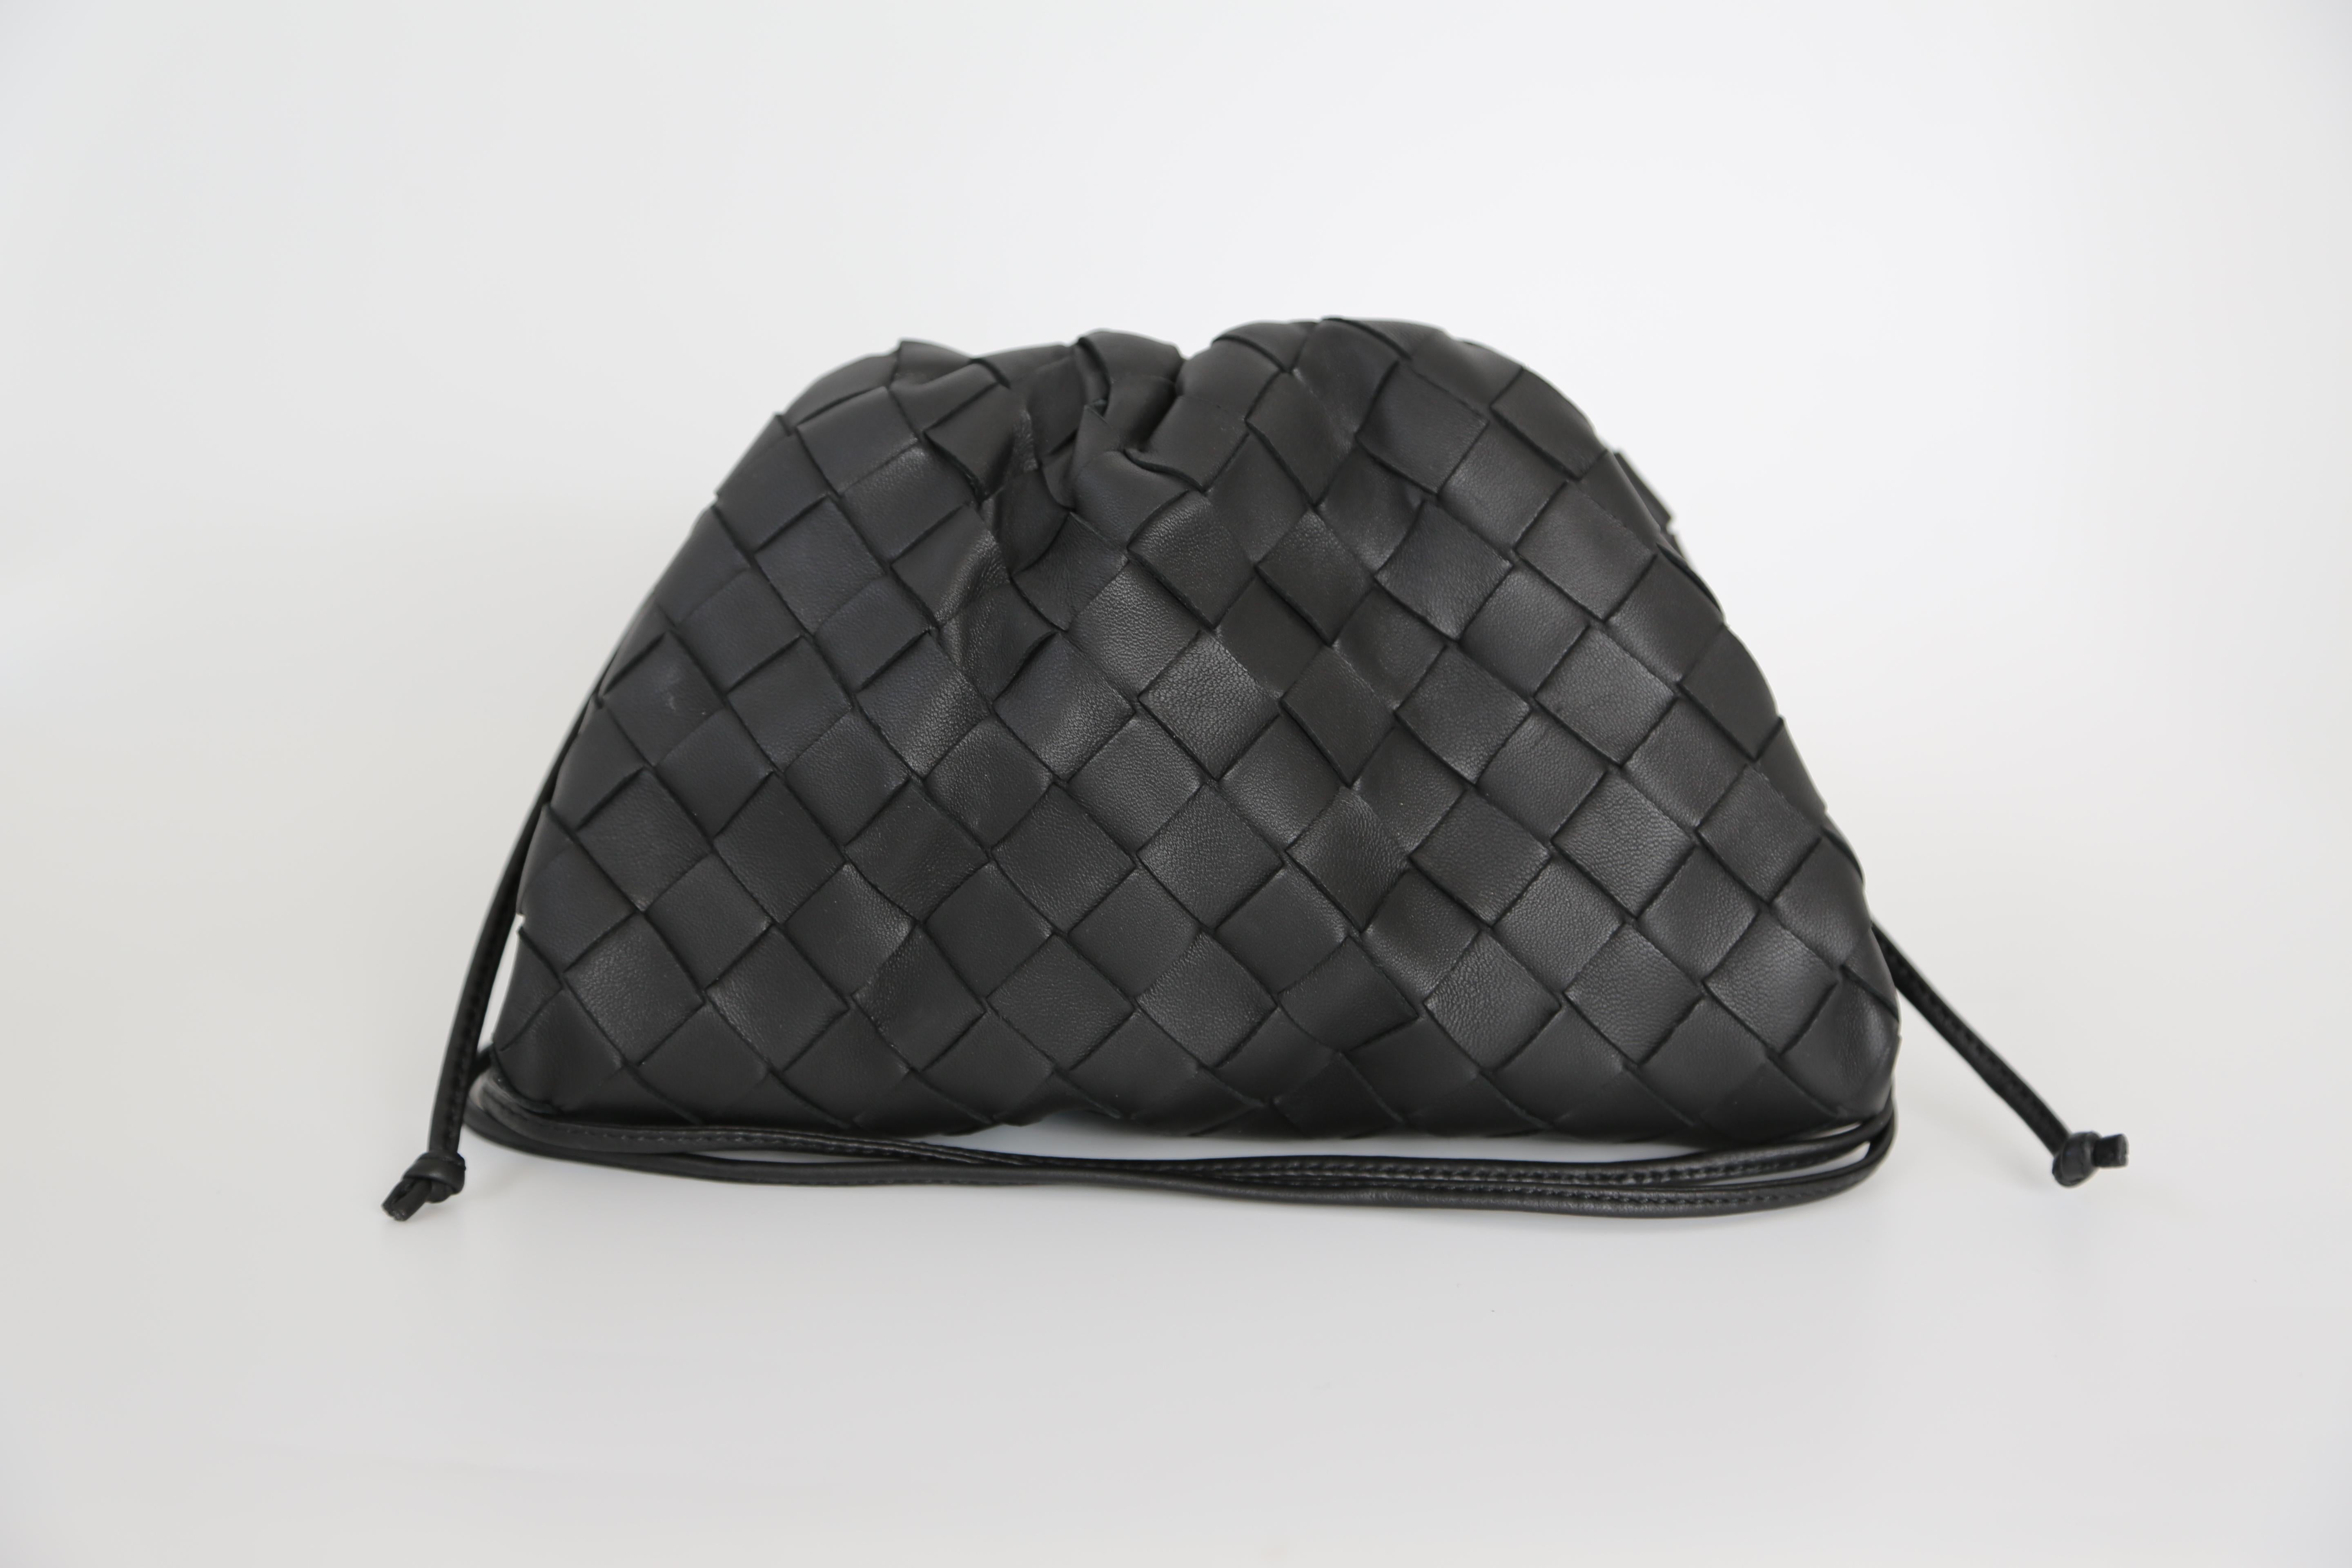 Bottega Veneta showcases their signature Intrecciato weaving, a technique that was created by Bottega Veneta in the late 1960s and involves strips of leather that are intertwined to create a woven pattern. The bag comes with a strap and is in